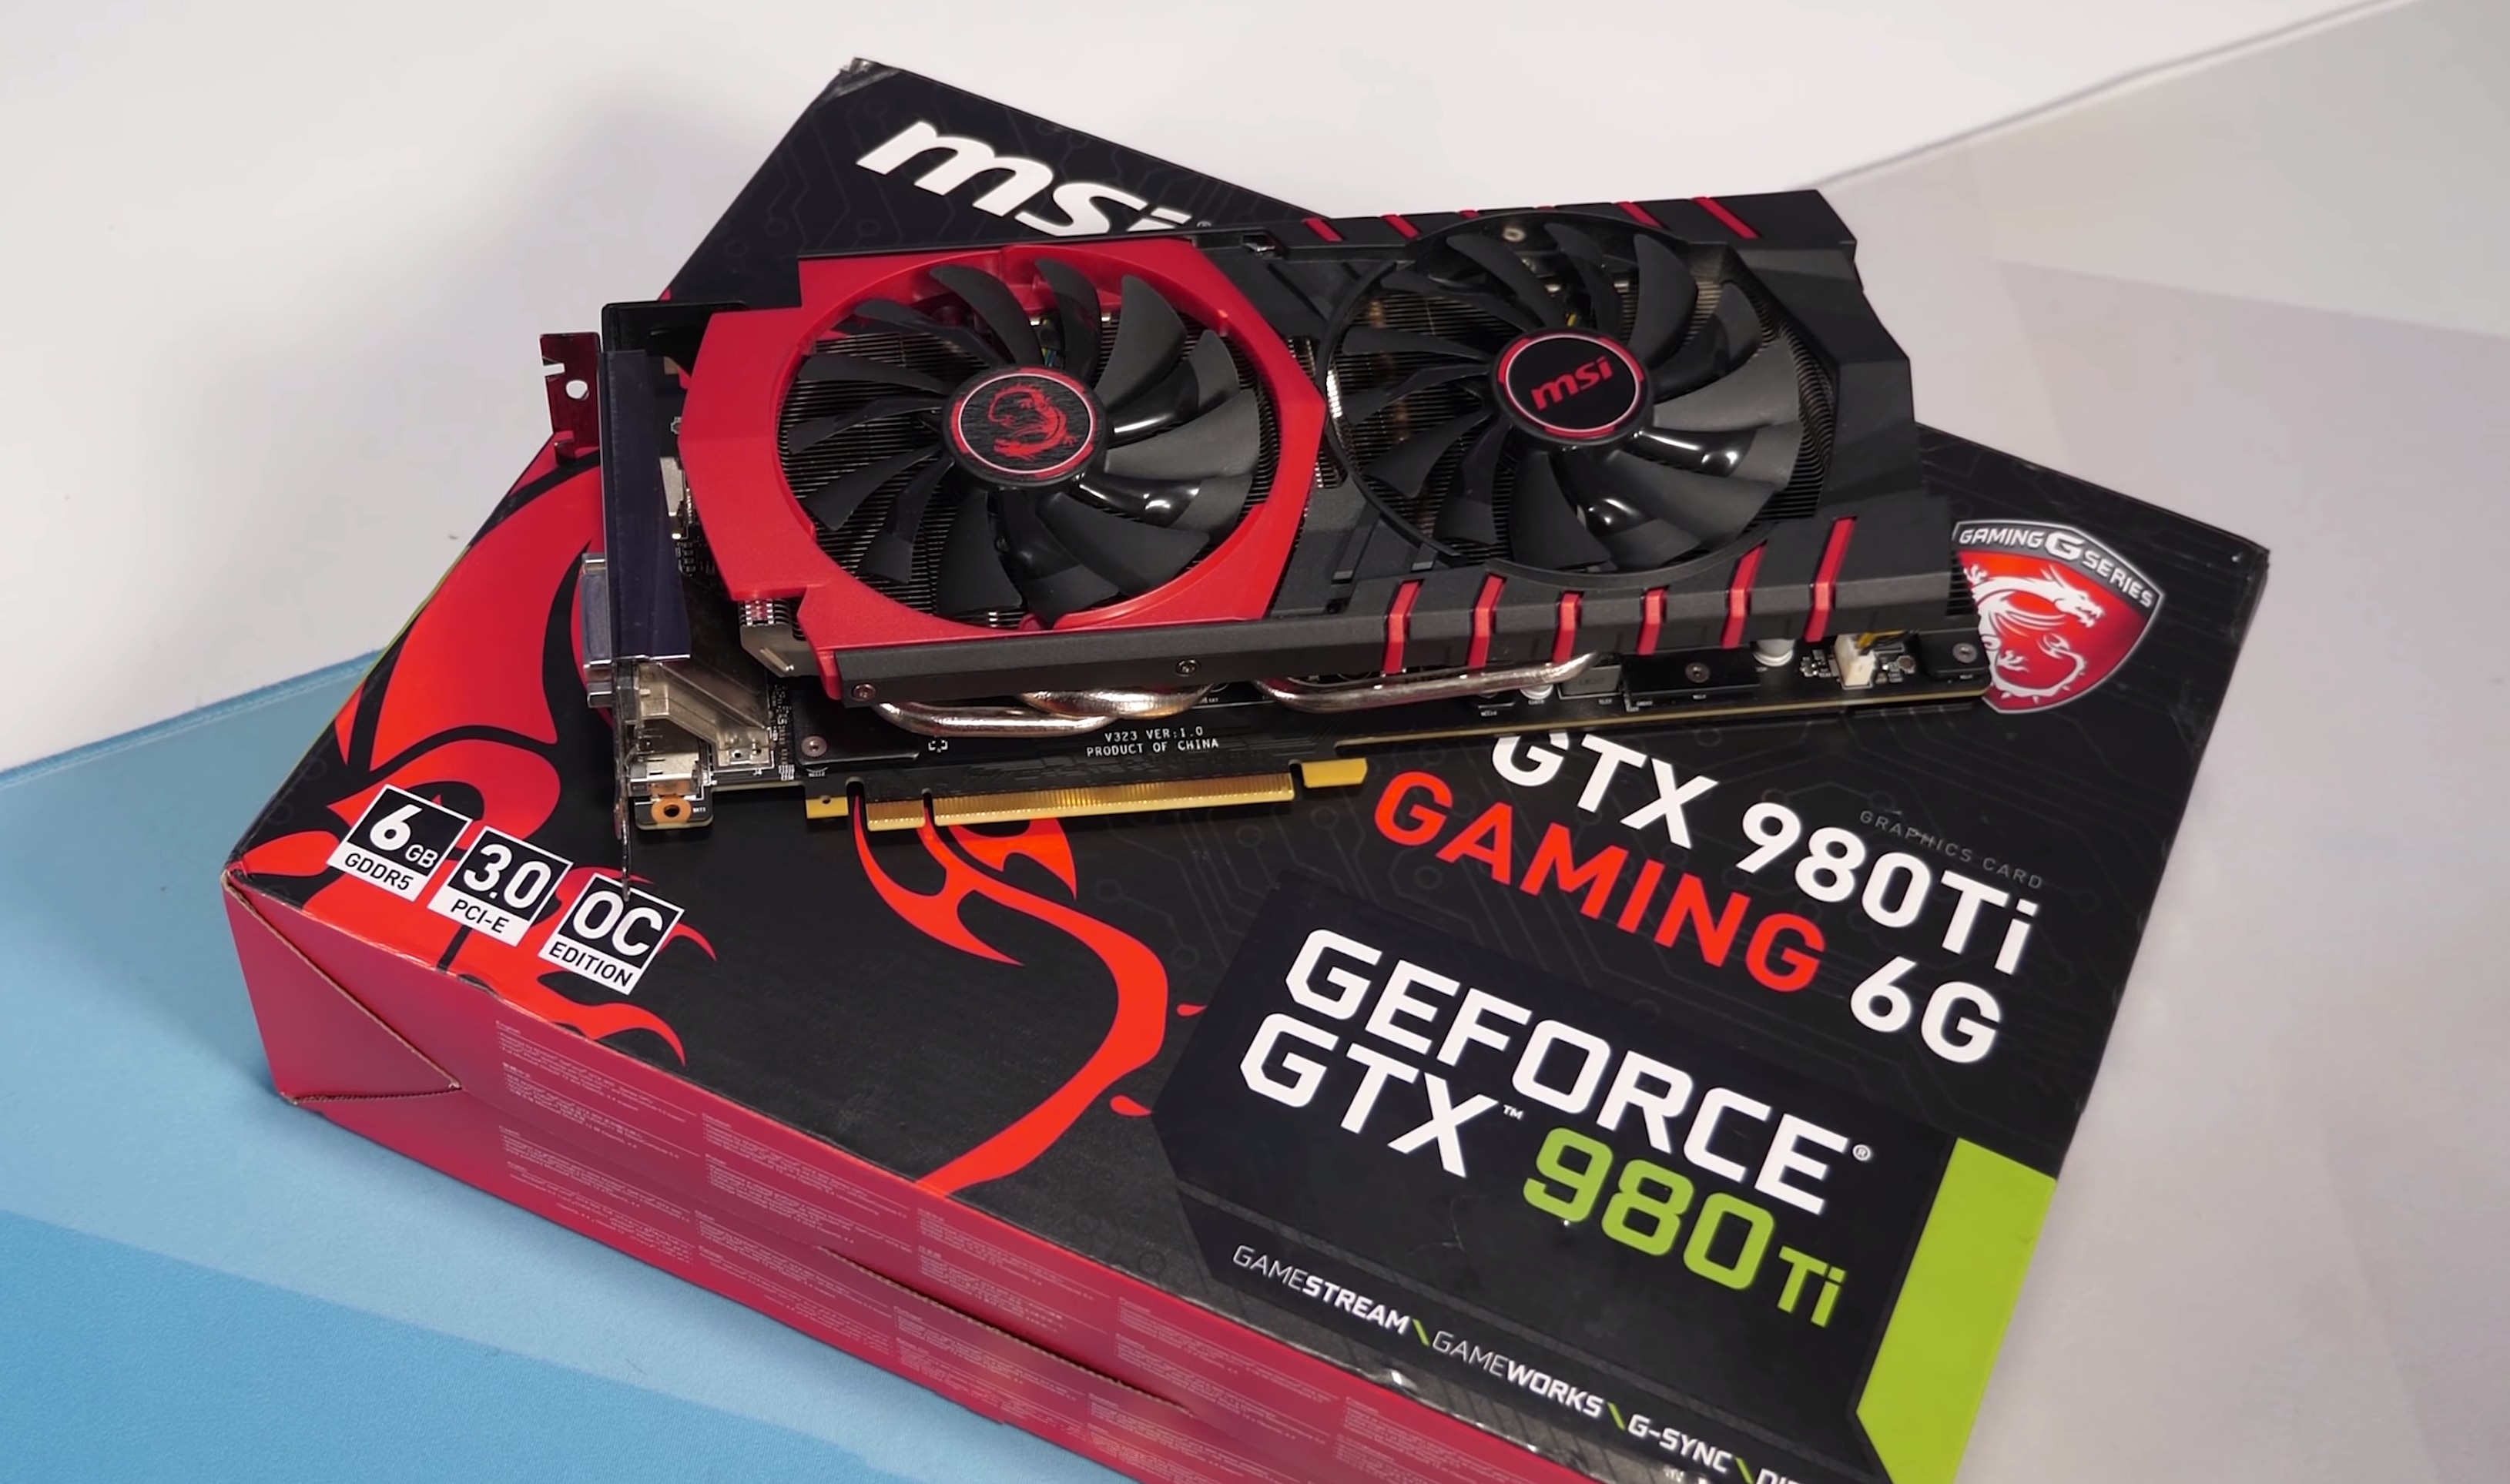 GeForce GTX 980 Ti Revisited: How does it fare against the GTX 